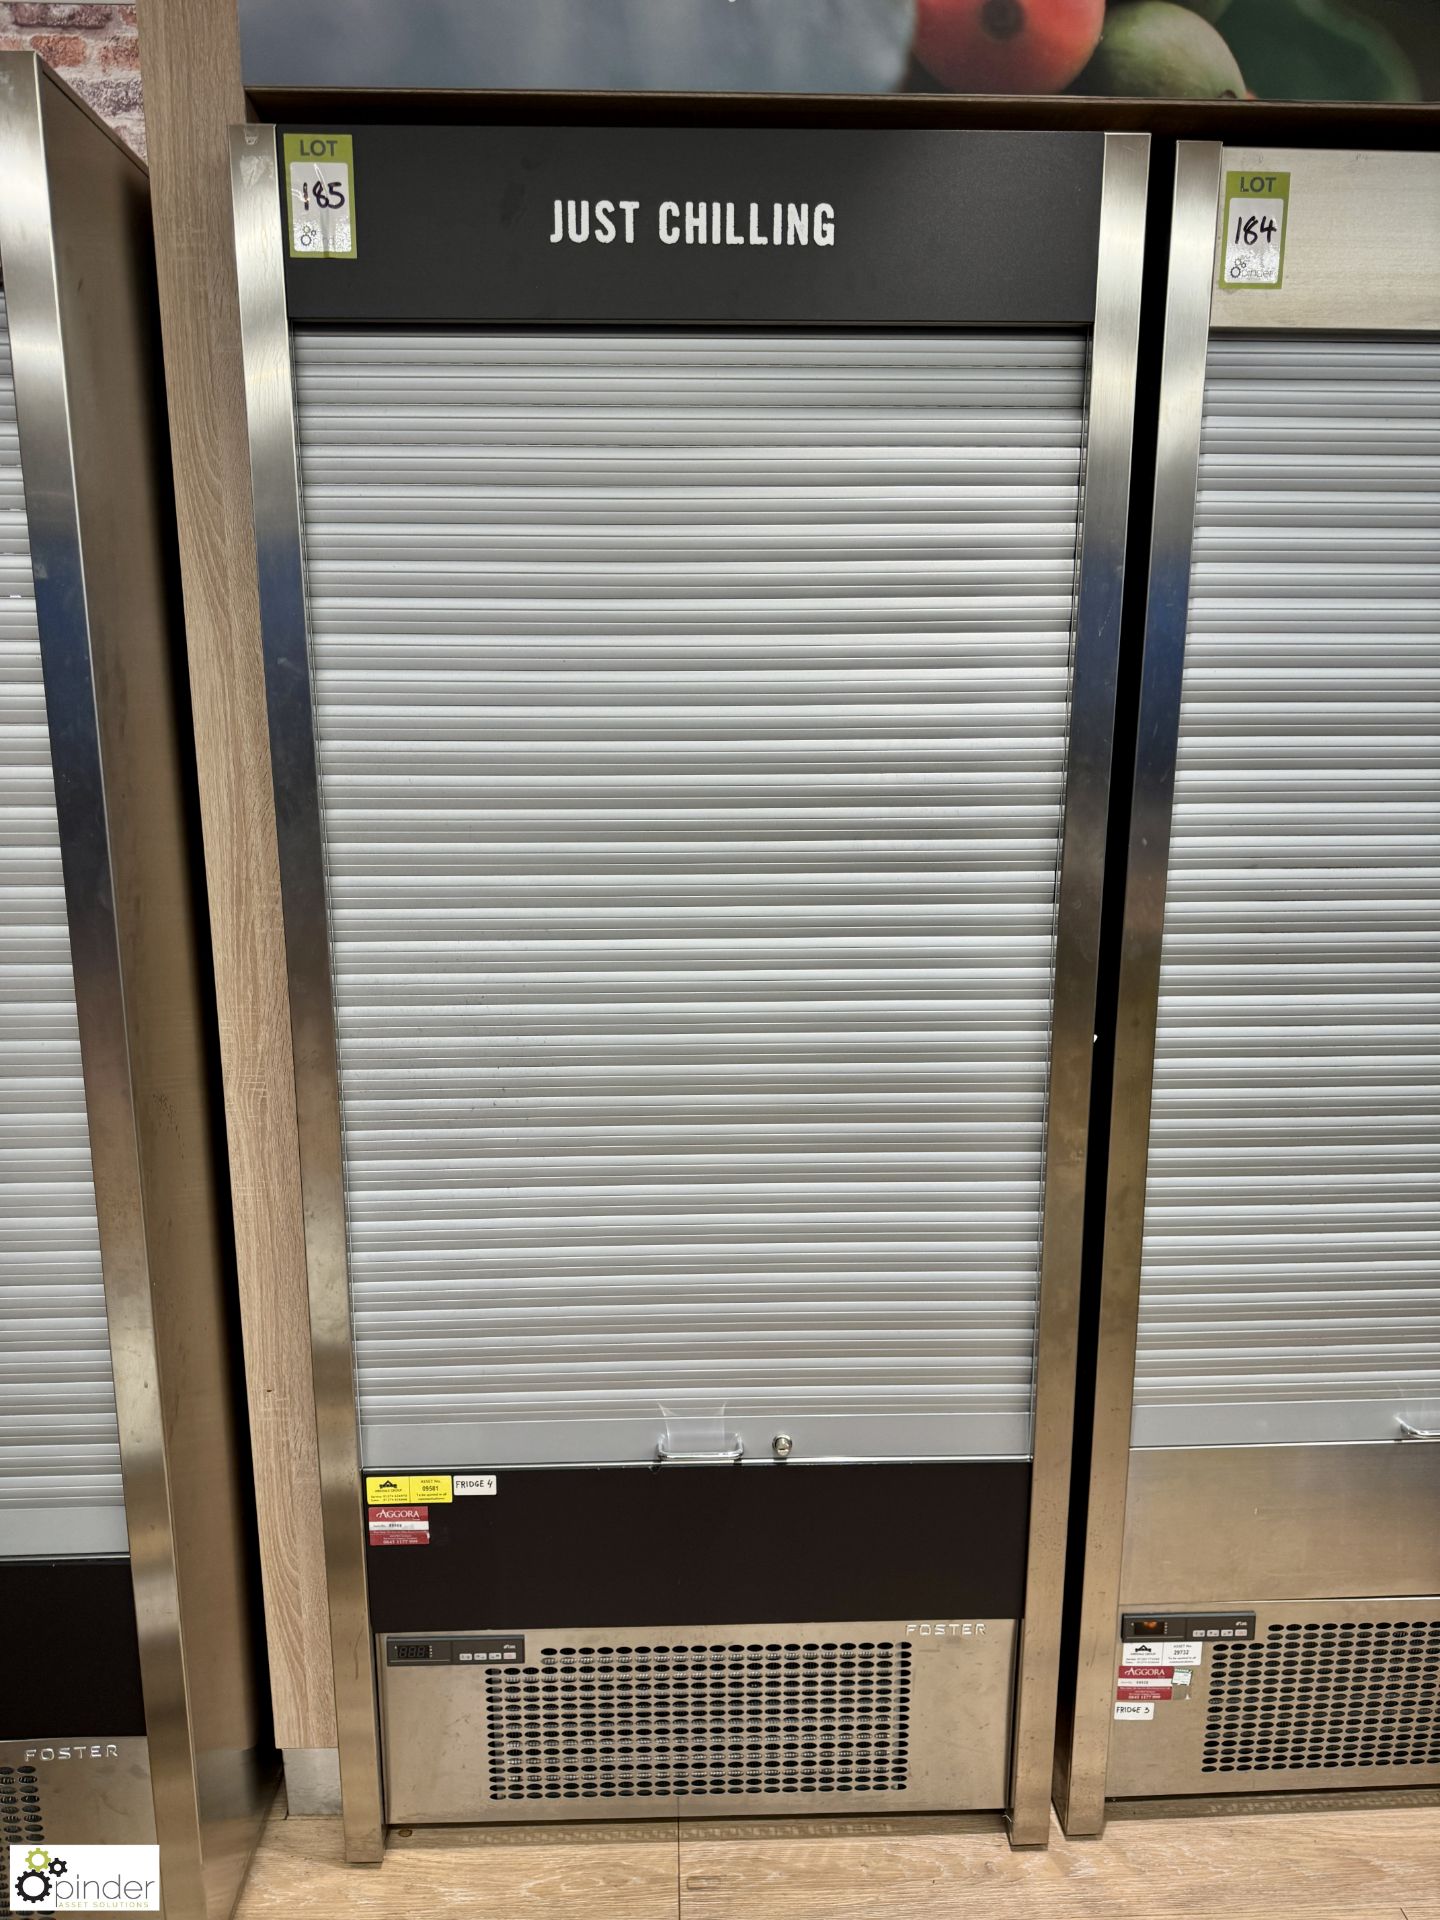 Foster stainless steel shutter front Chilled Display Unit, 240volts, 1200mm x 780mm x 2000mm ( - Image 2 of 3